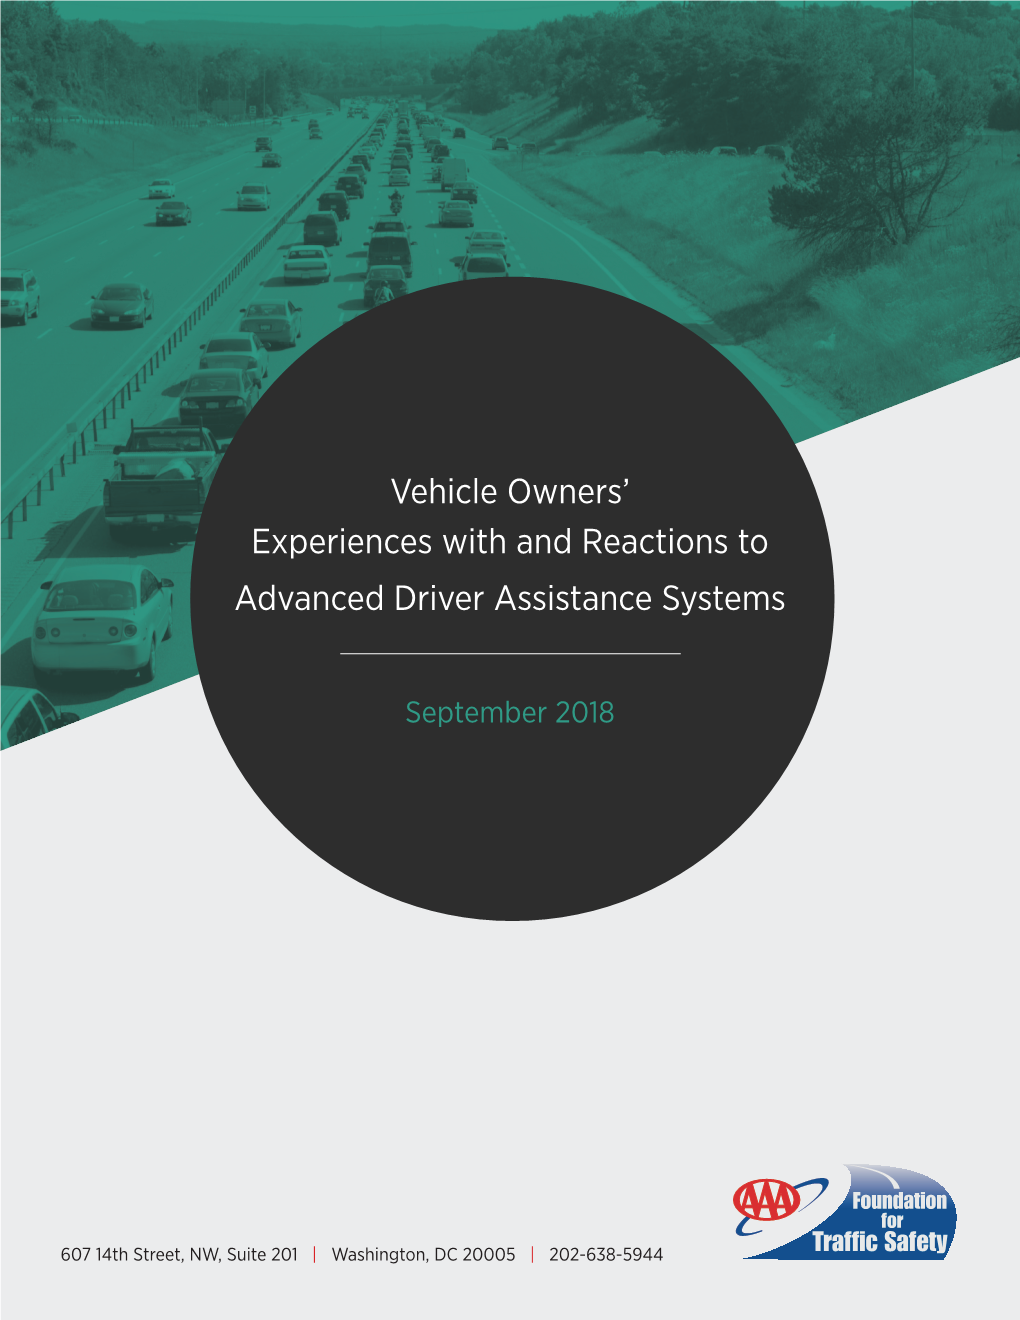 Vehicle Owners' Experiences with and Reactions to Advanced Driver Assistance Systems